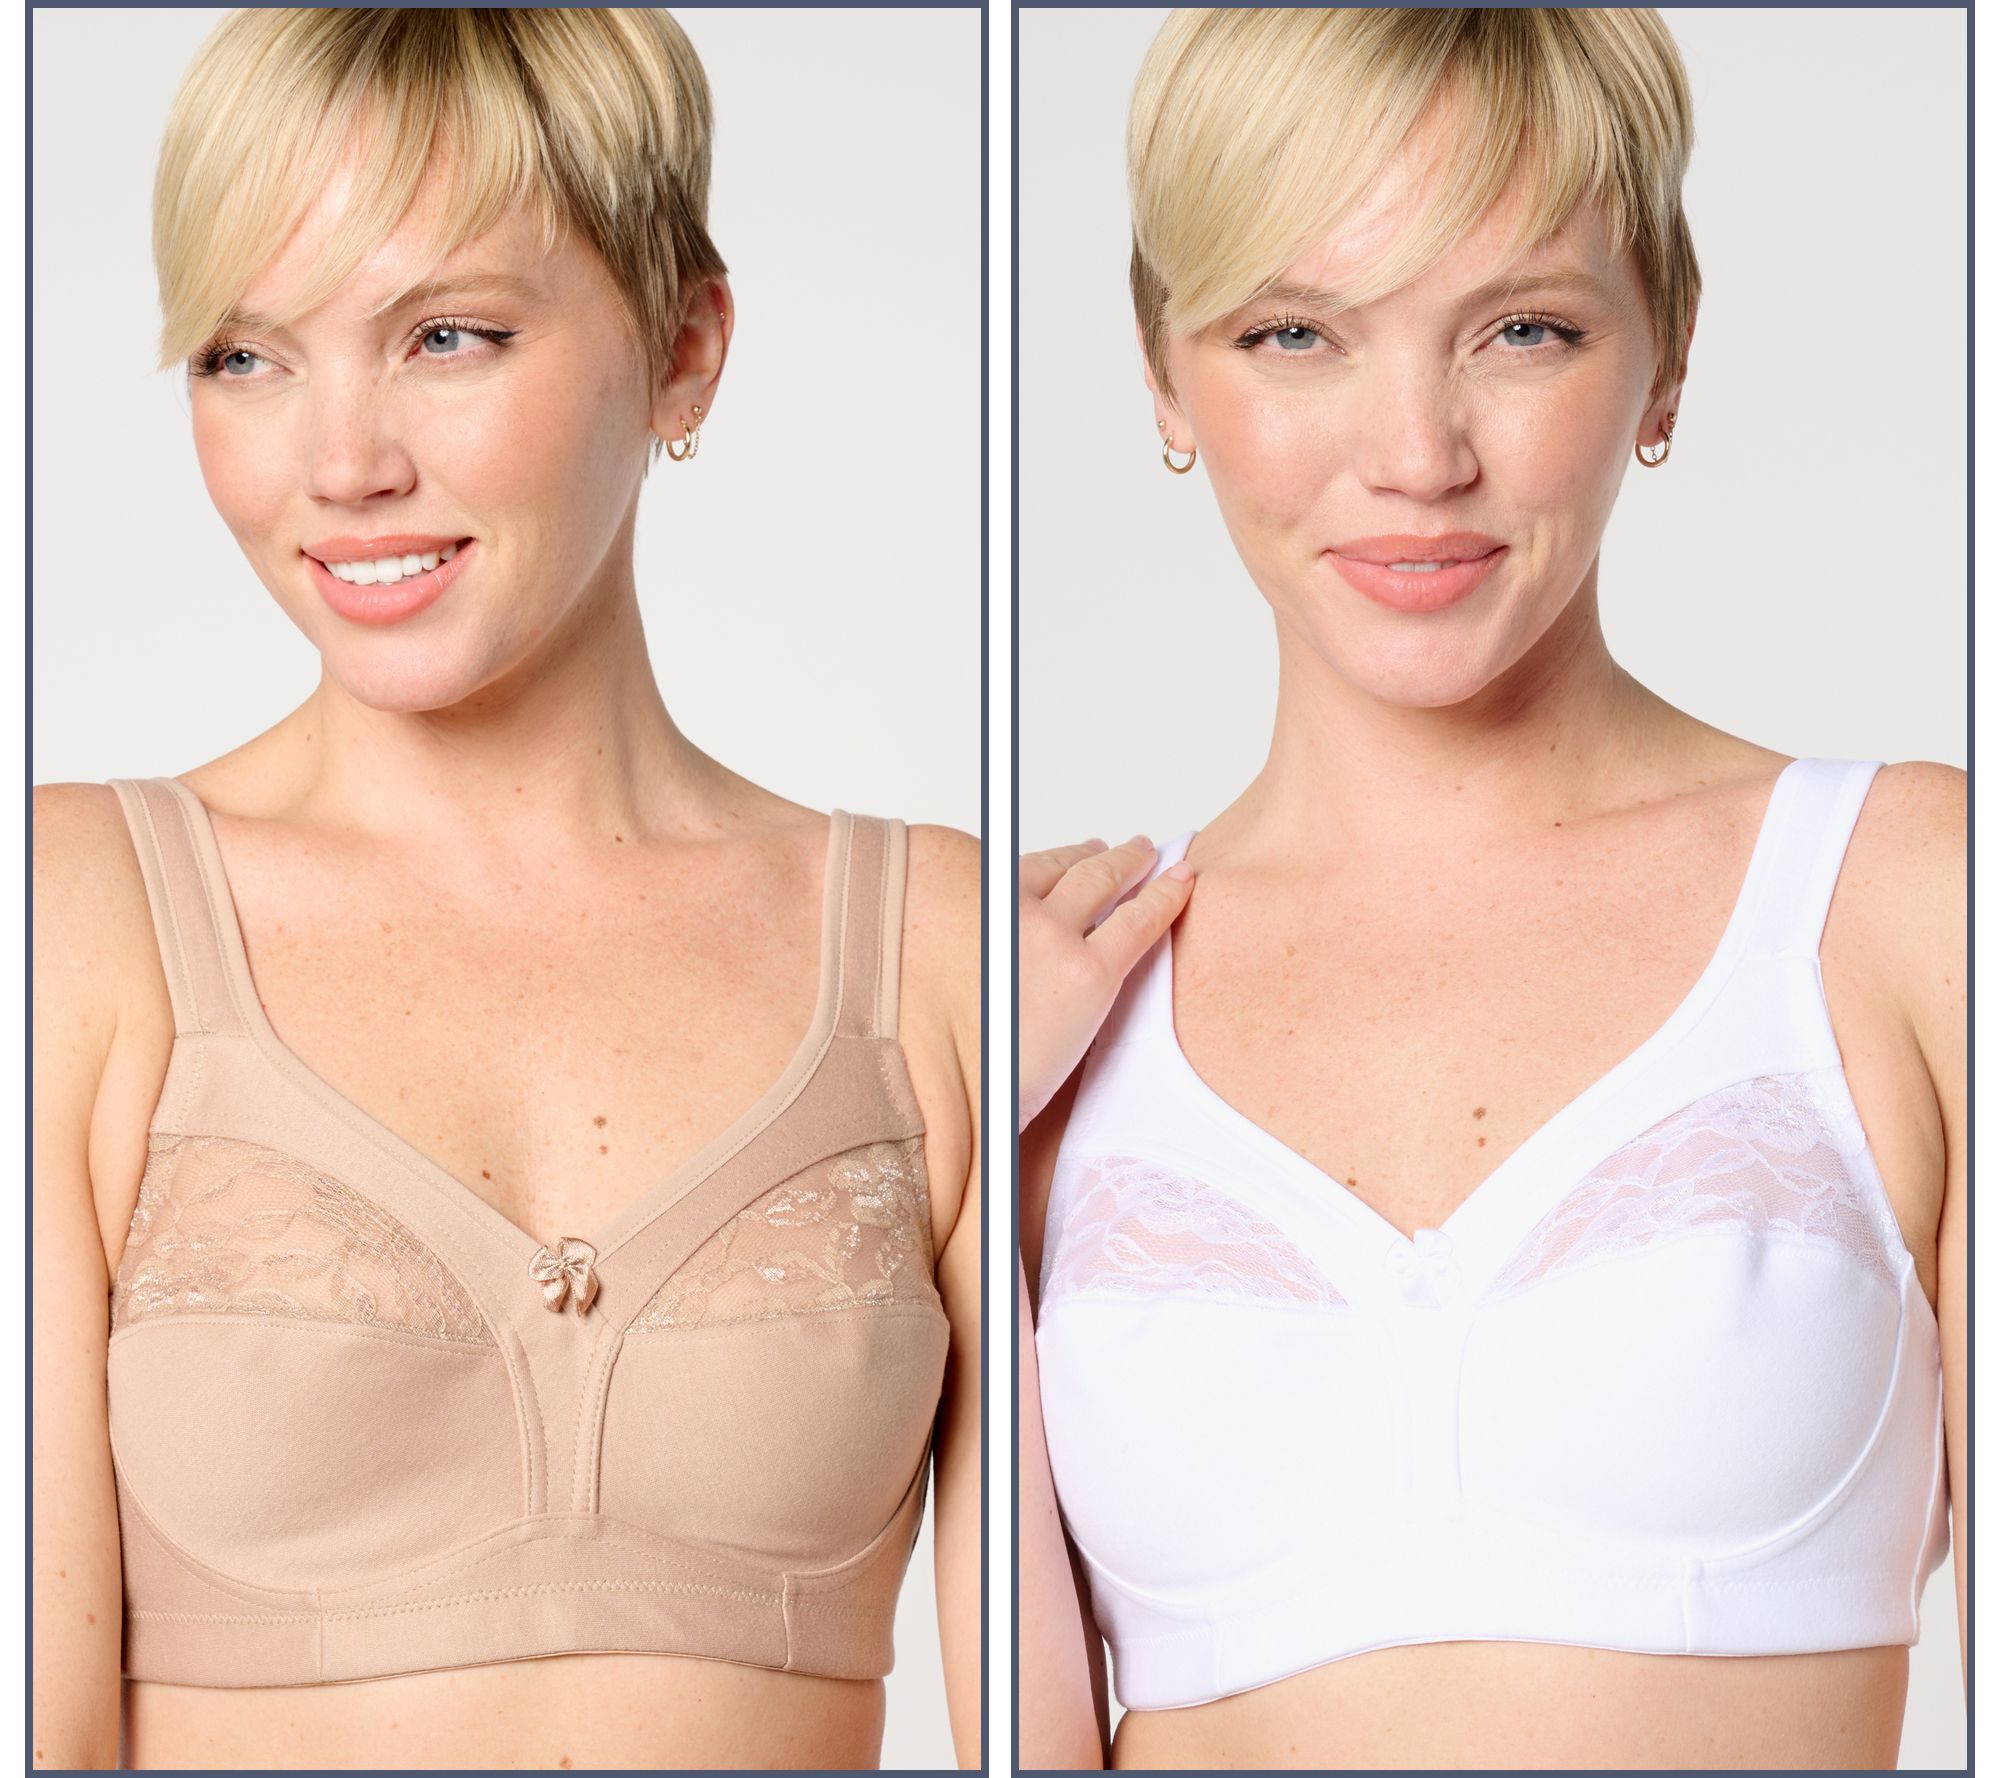 Mother's Day Sale: Bali, Playtex & Maidenform Bras from $15.99